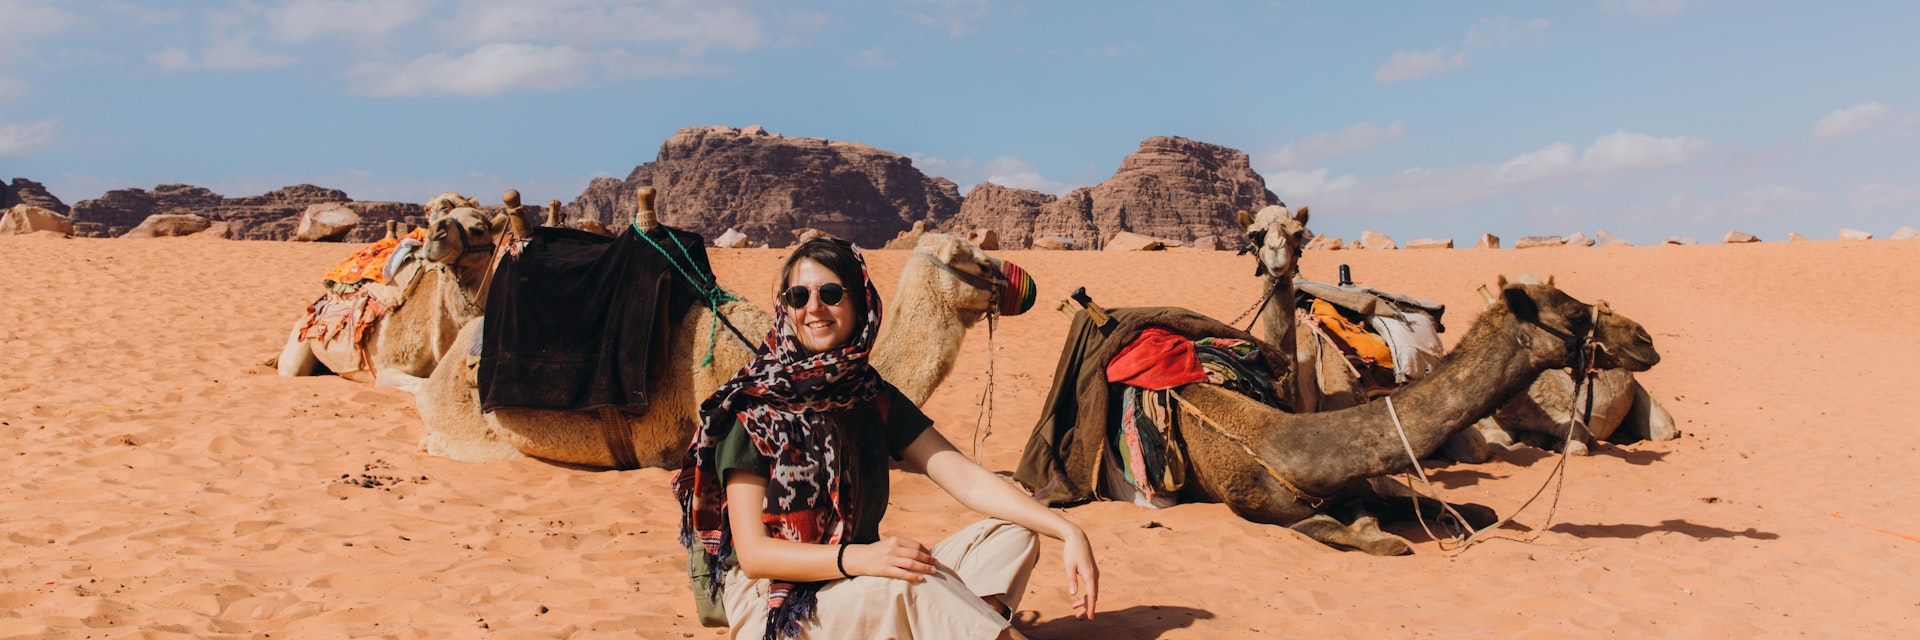 Female explorer in scarf and sunglasses relaxing at the camel bedouin camp at the beautiful landscape in the desert of Jordan